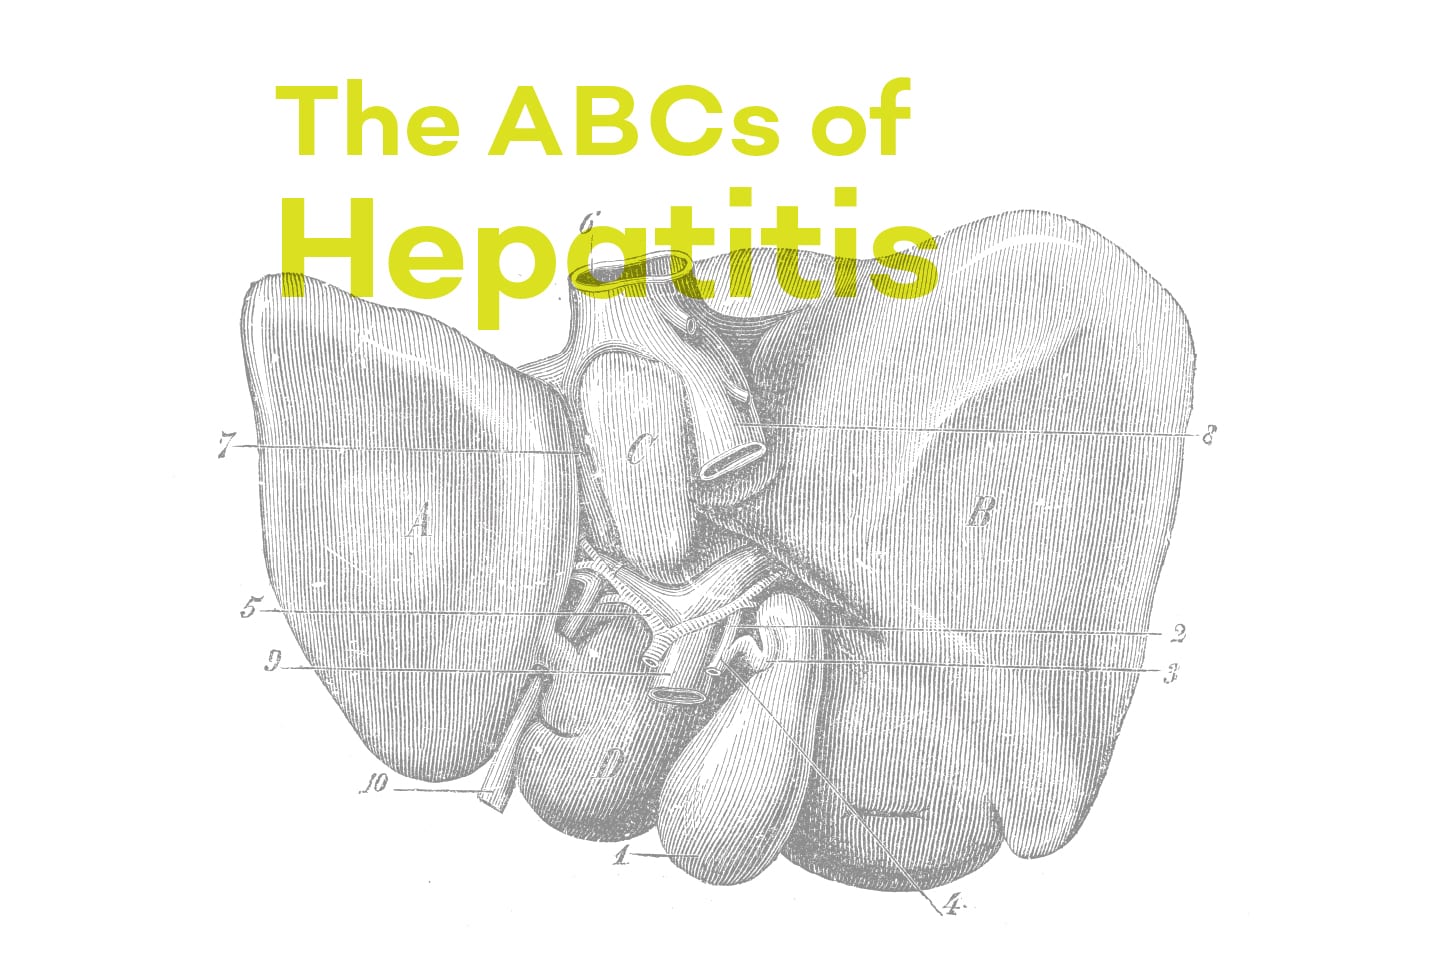 Illustration of organ with text 'The ABCs of Hepatitis'